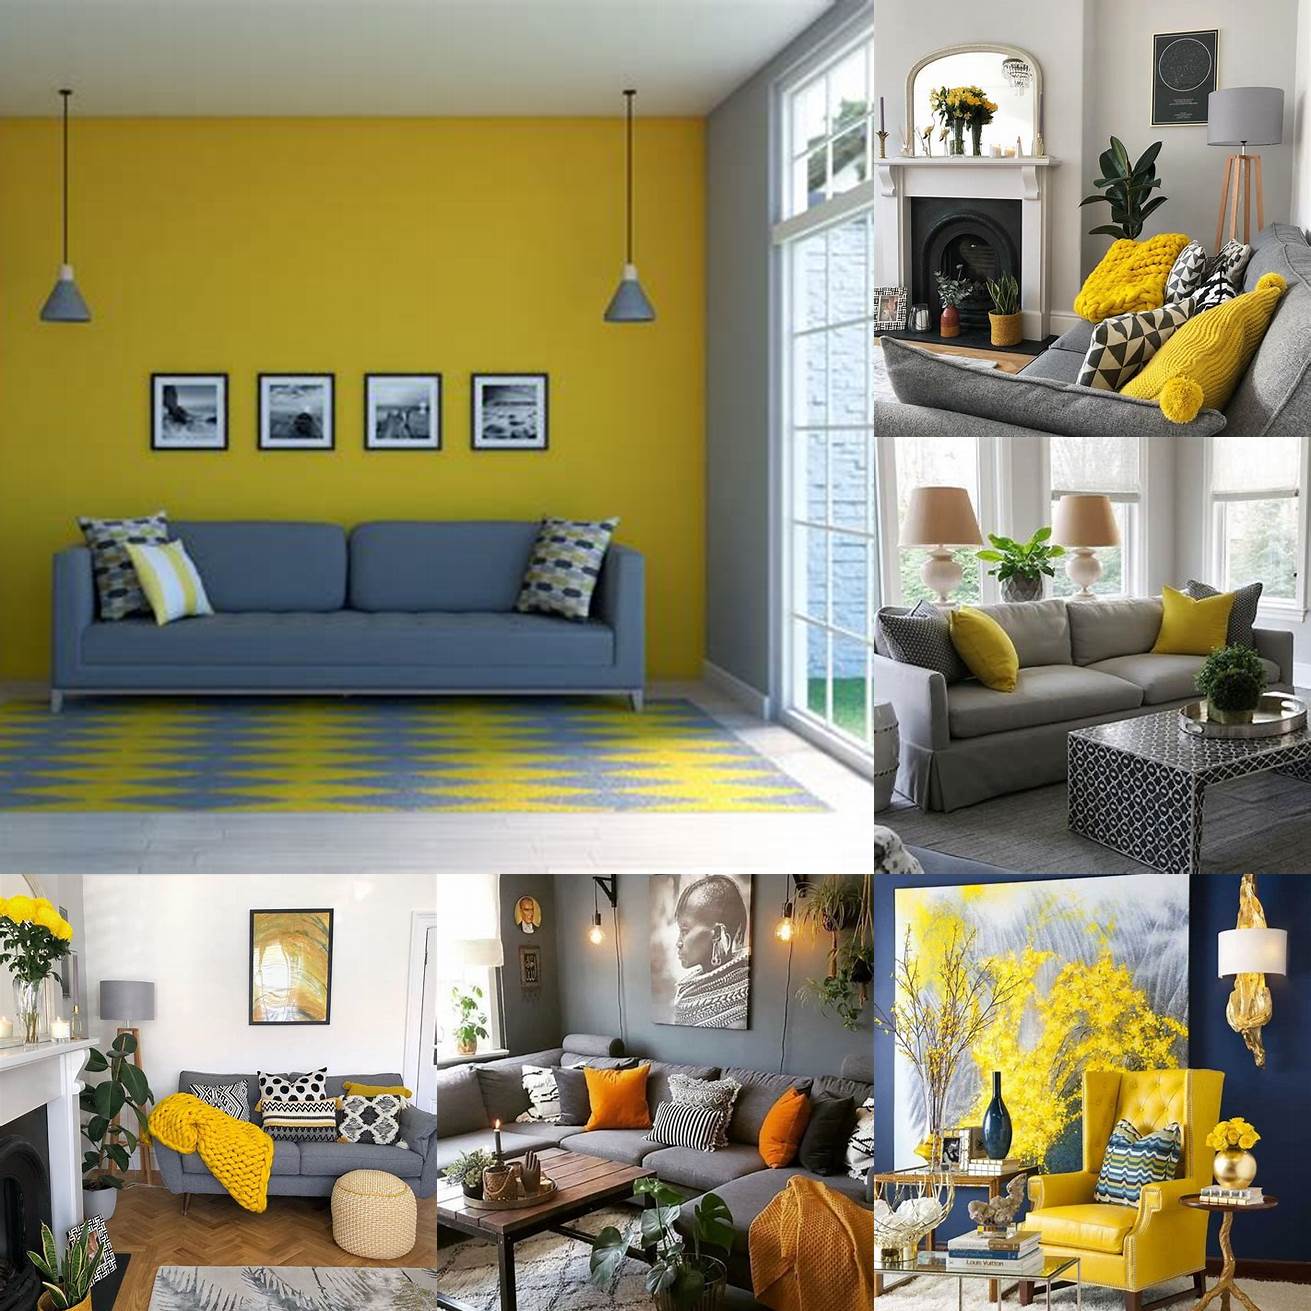 Gray walls with yellow accent pillows and artwork